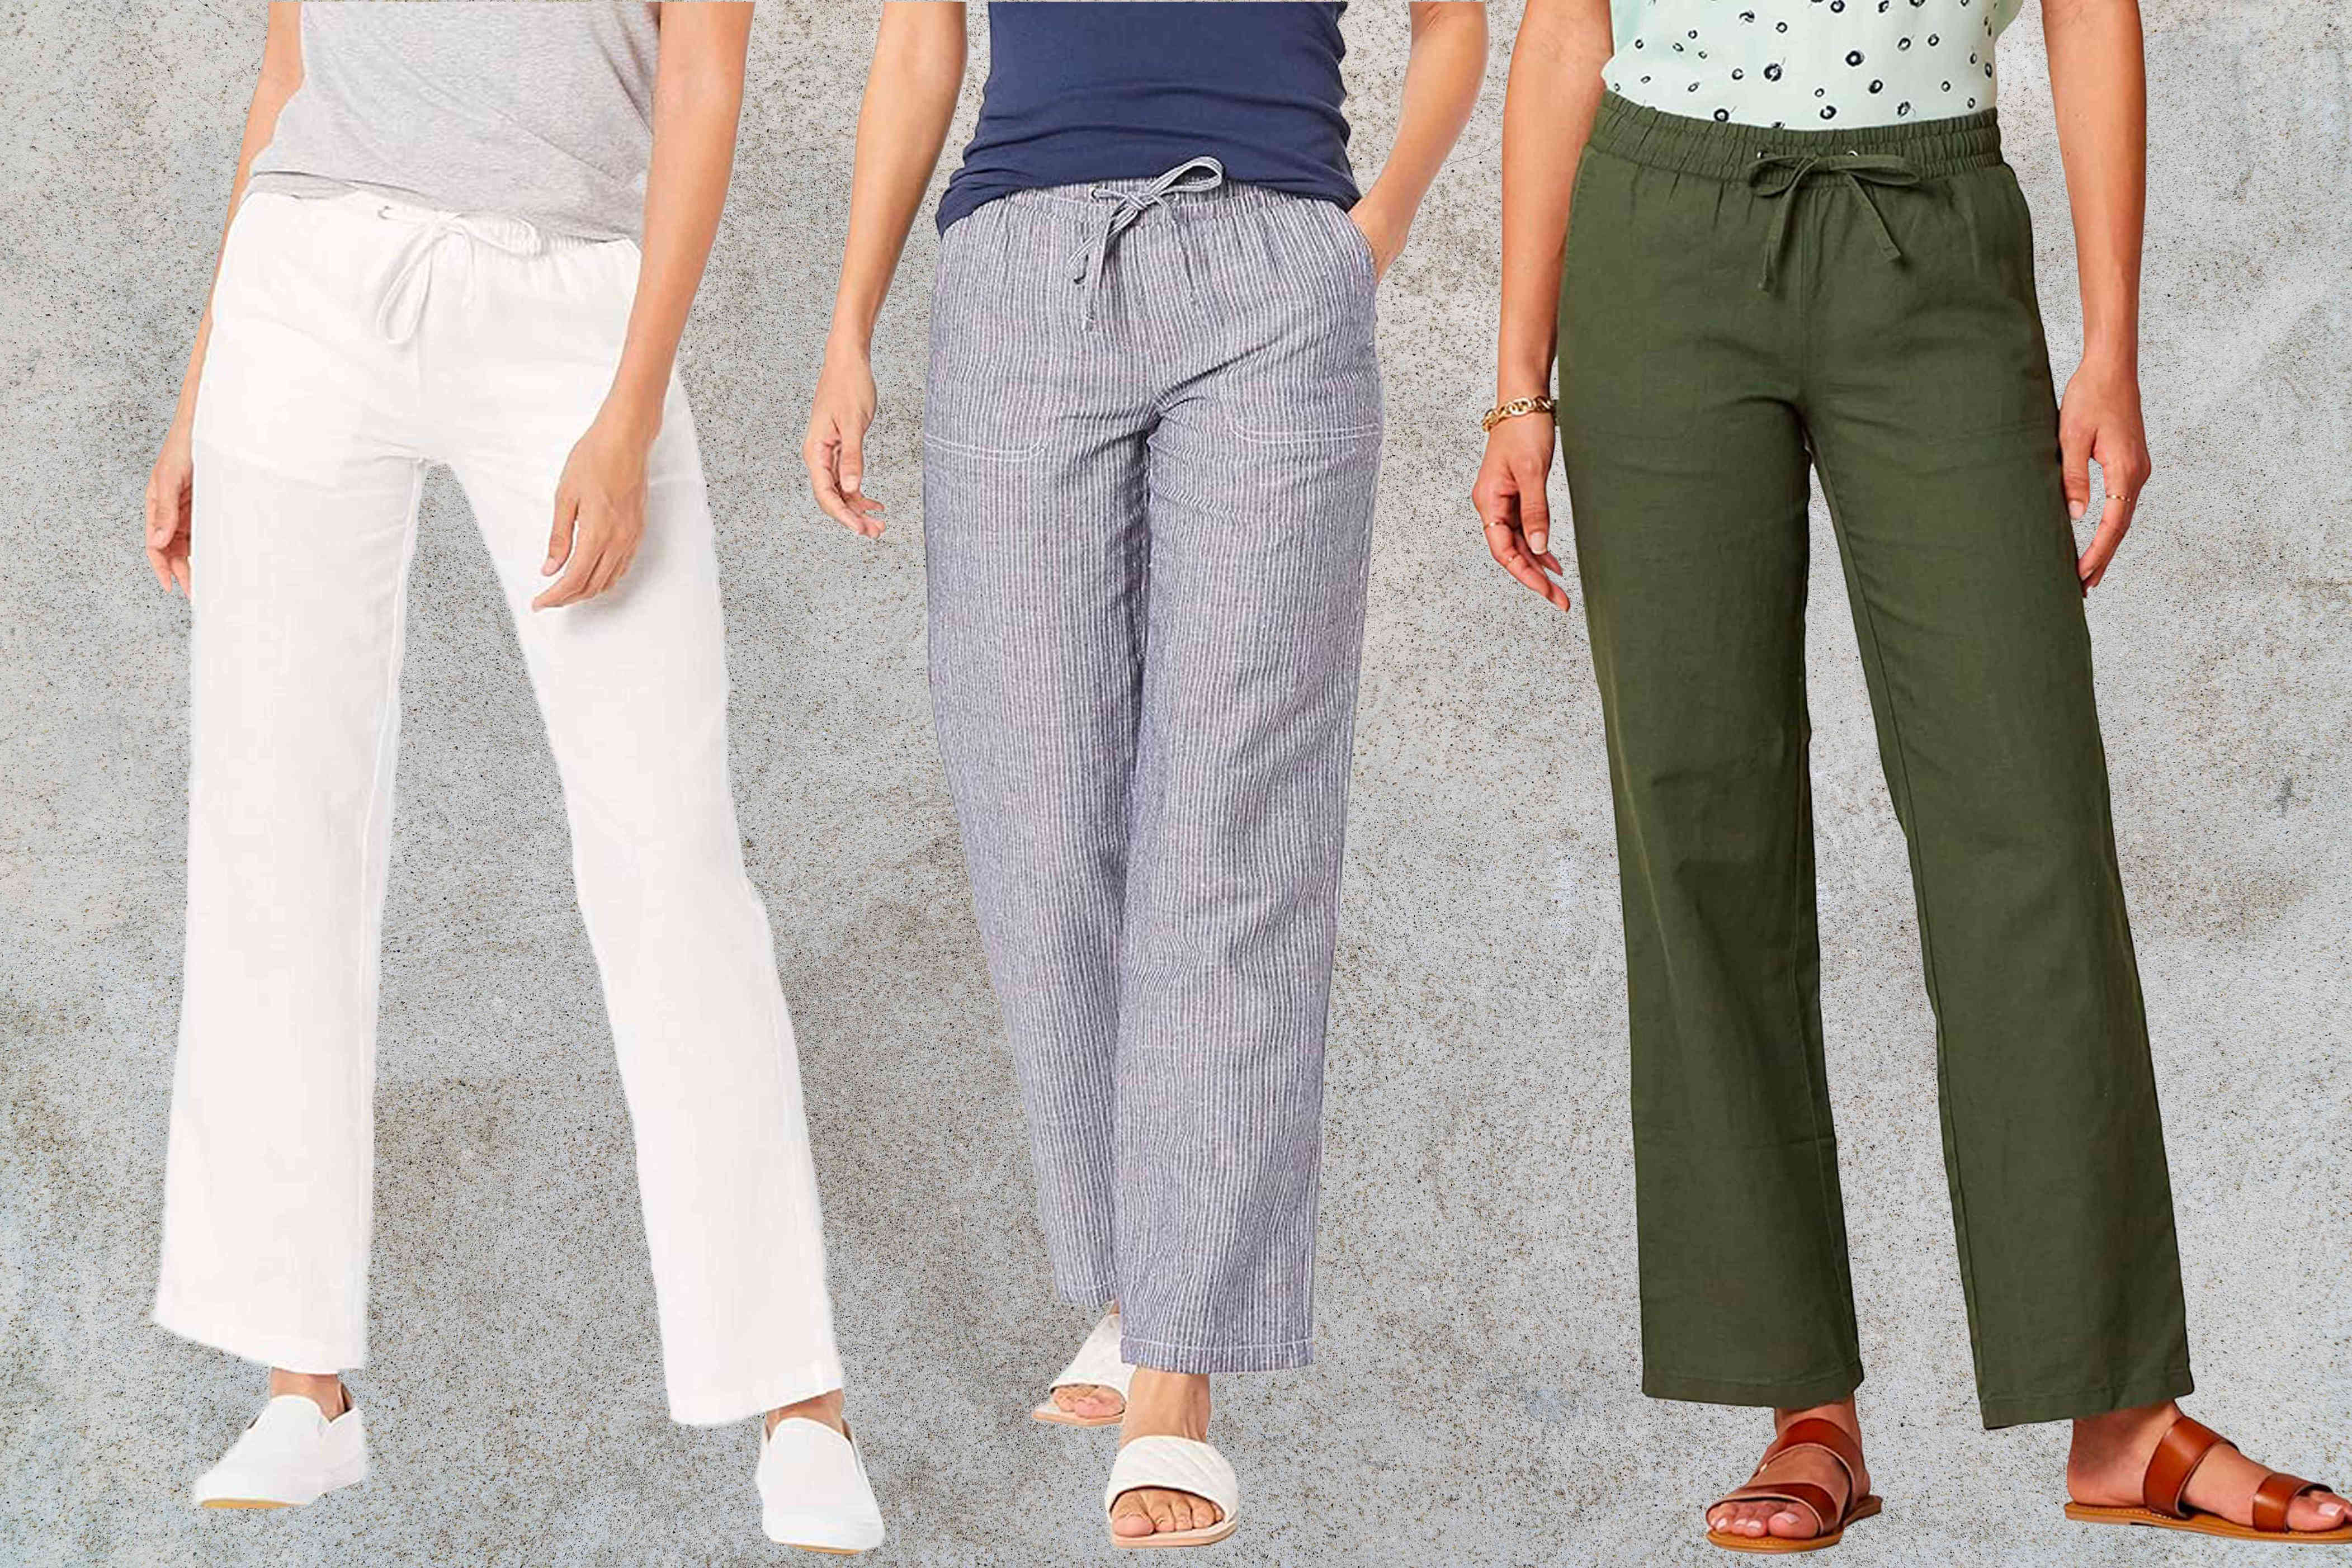 amazon, we found the perfect white linen pants for summer on sale for 70% off at amazon